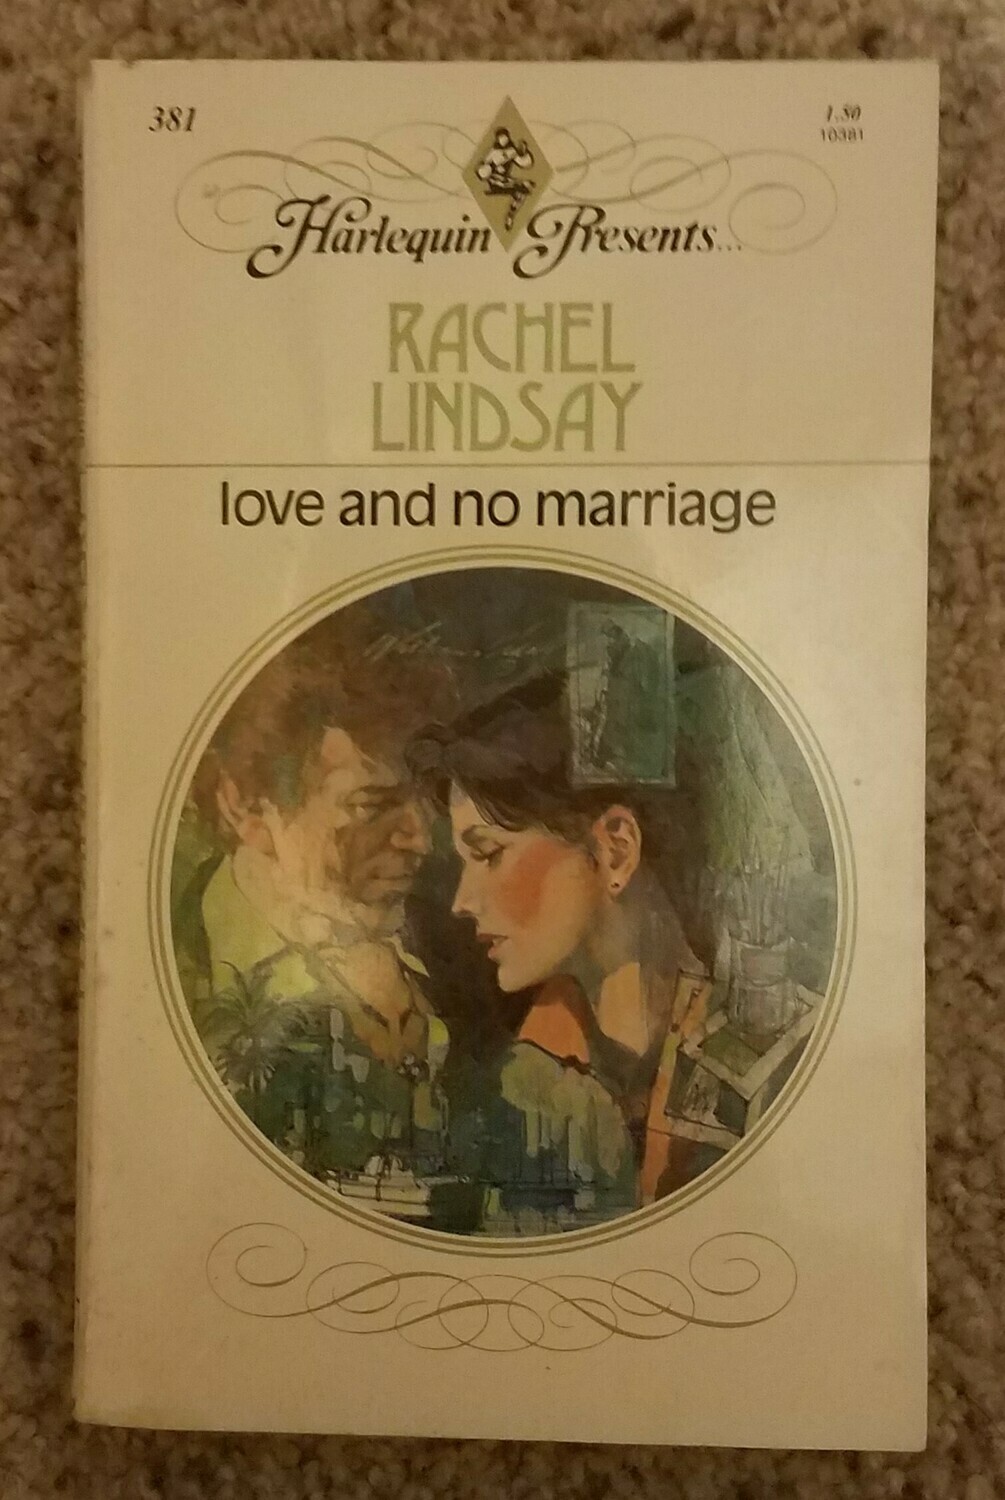 Love and No Marriage by Rachel Lindsay